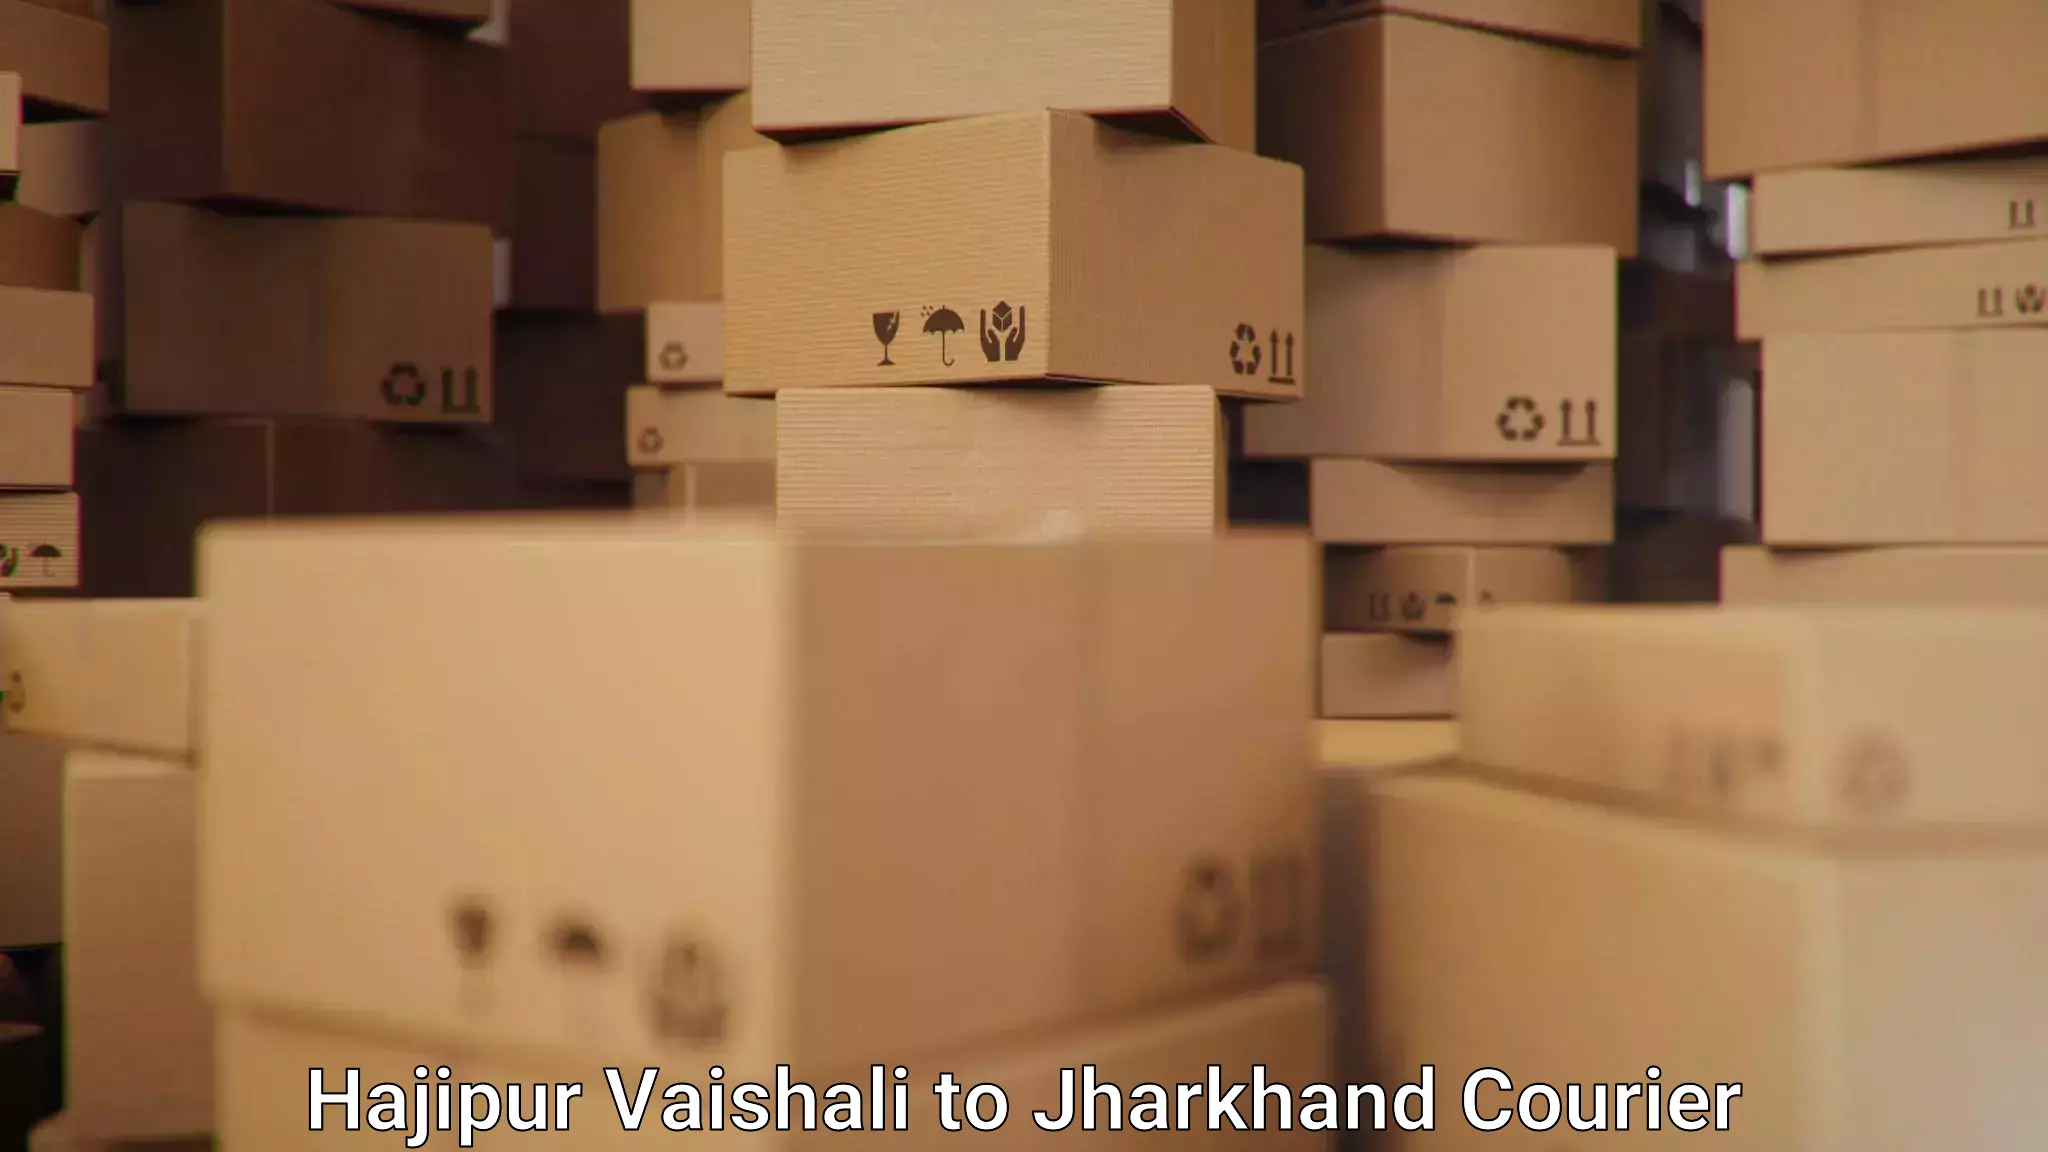 High-priority parcel service in Hajipur Vaishali to Jharkhand